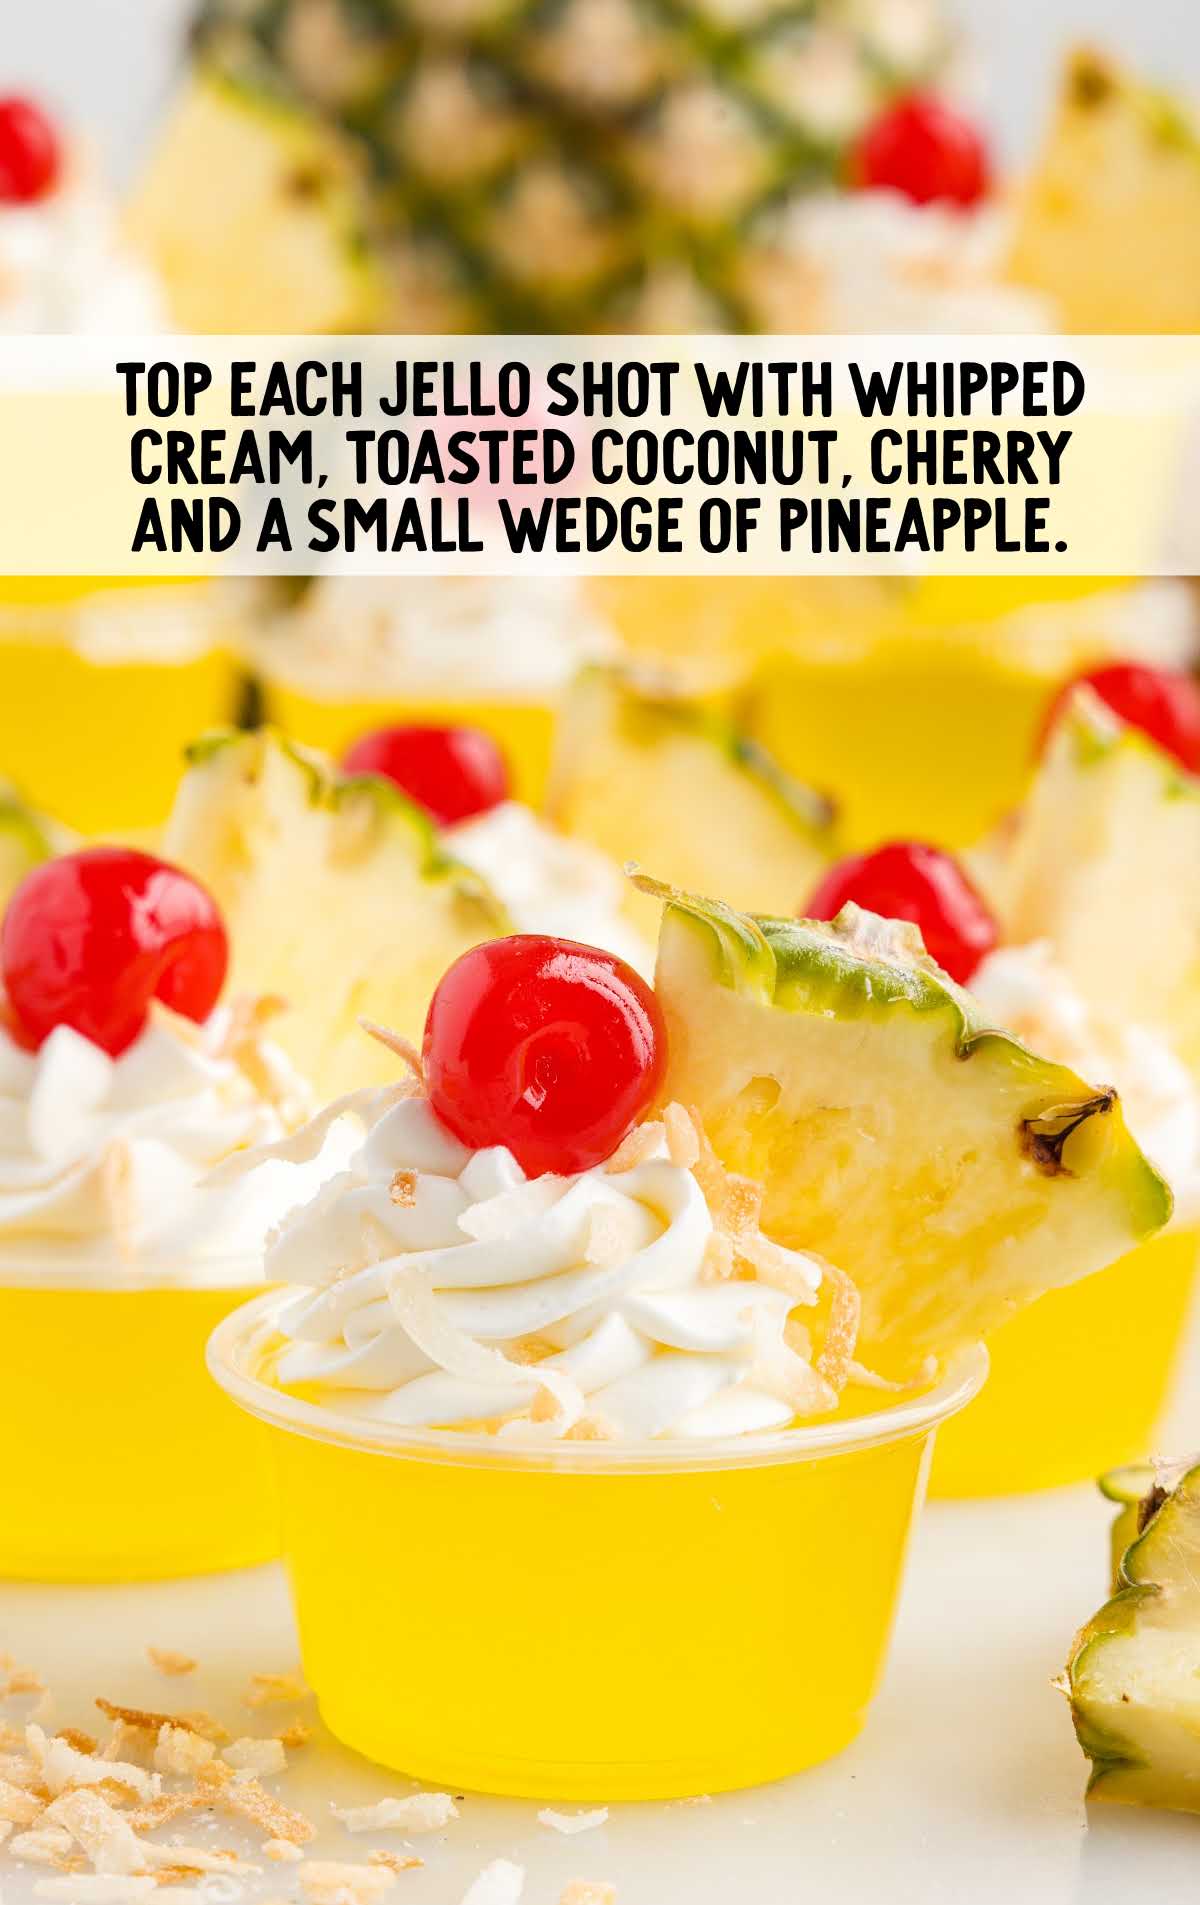 whipped cream, toasted coconut, cherry and small pineapple topped on each shot